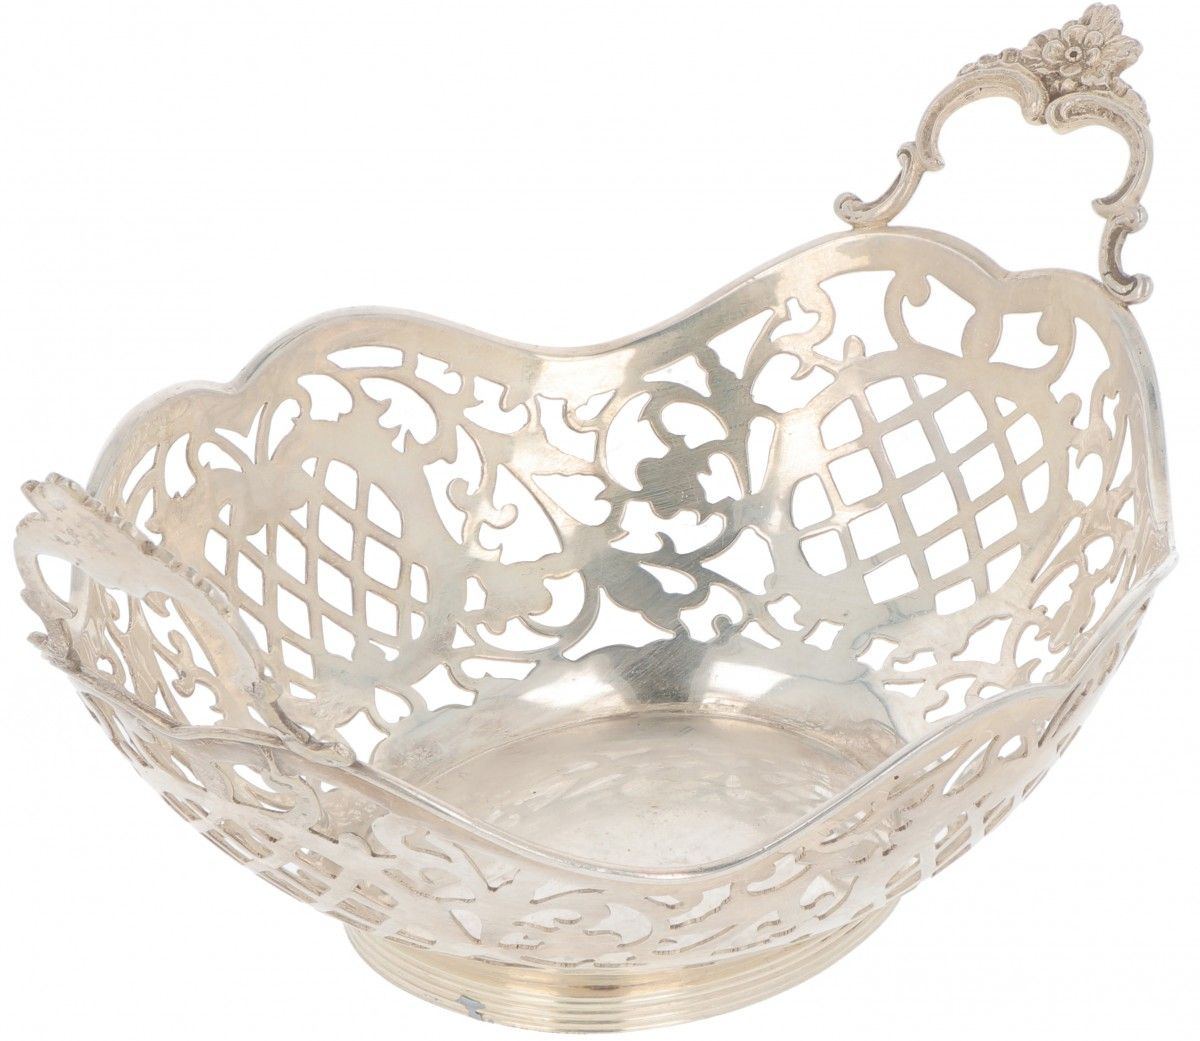 Bonbon basket silver-plated. Oval model with openwork sides, soldered handles an&hellip;